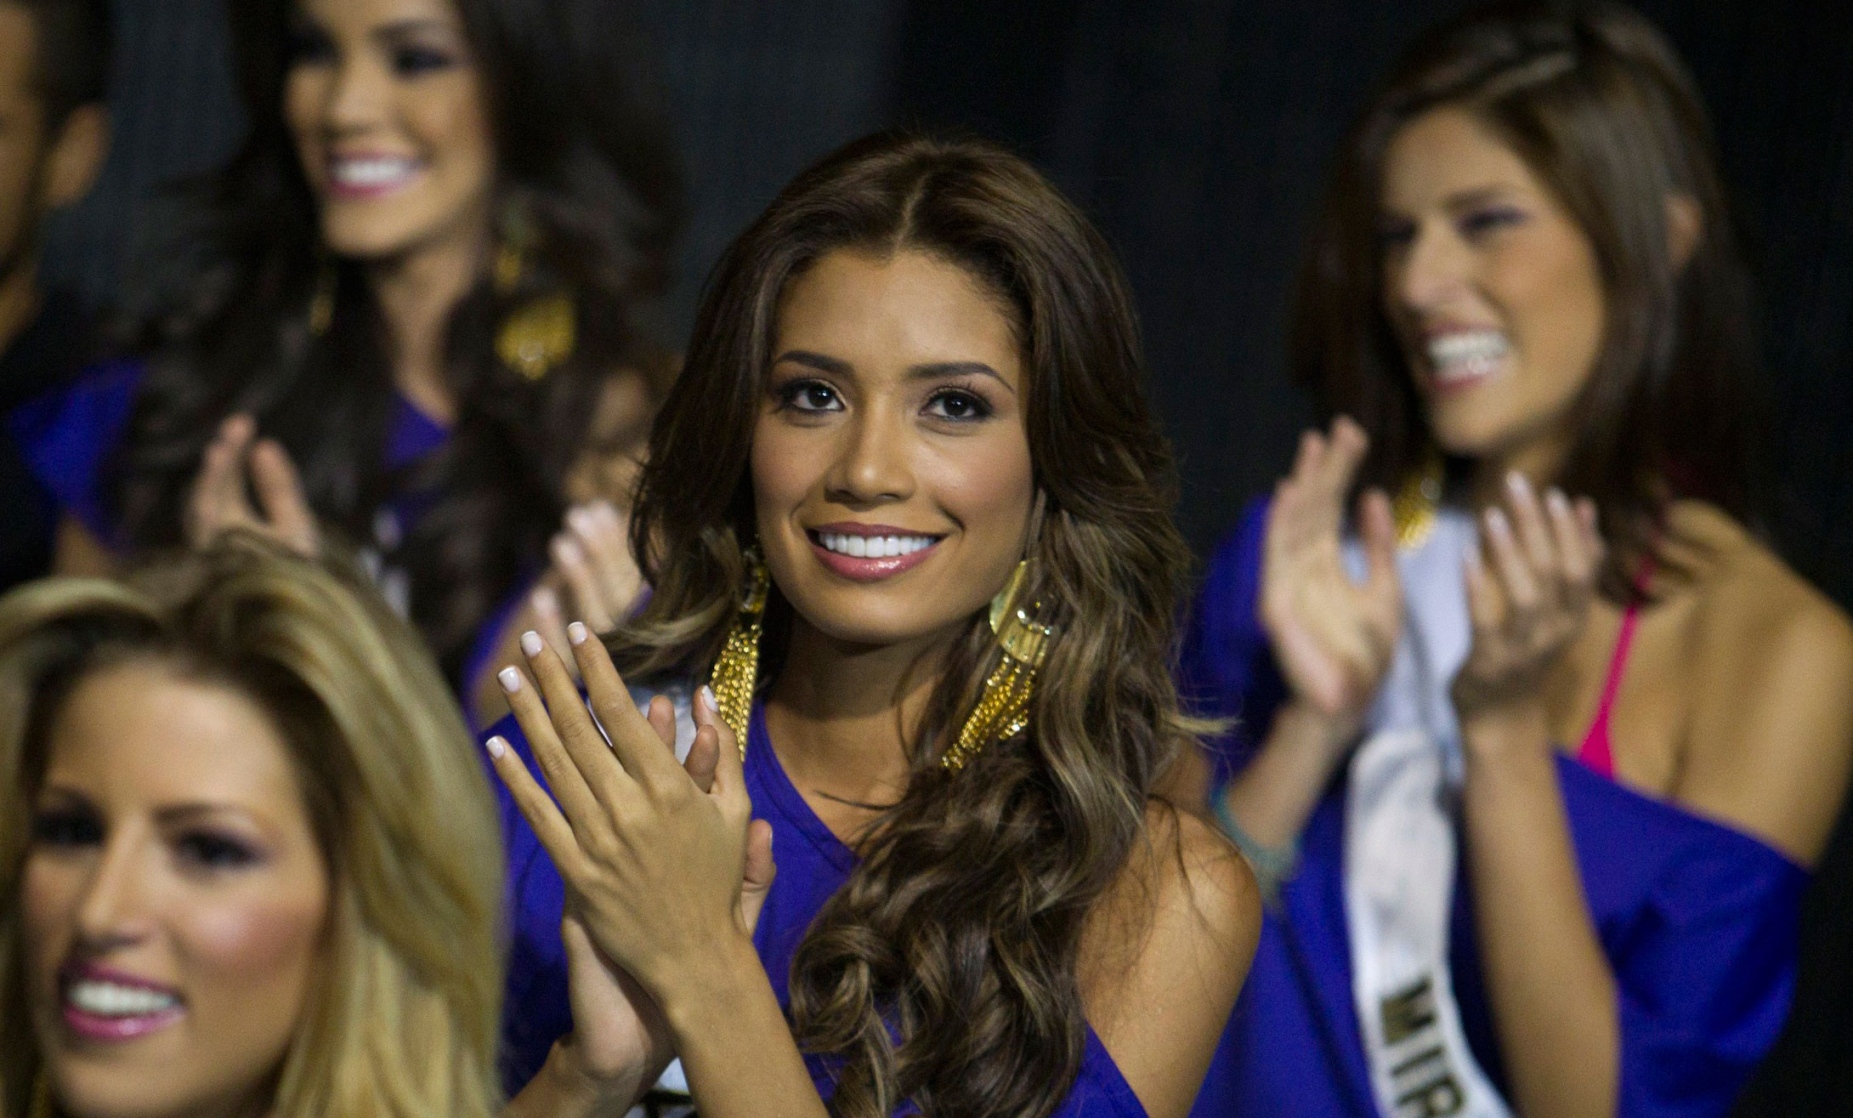 Miss Venezuela 2011 beauty pageant candidate Alexandra Hernandez (C) of Aragua, takes part in a practice session and media presentation in Caracas October 13, 2011. The pageant is scheduled to take place on October 15. (REUTERS)